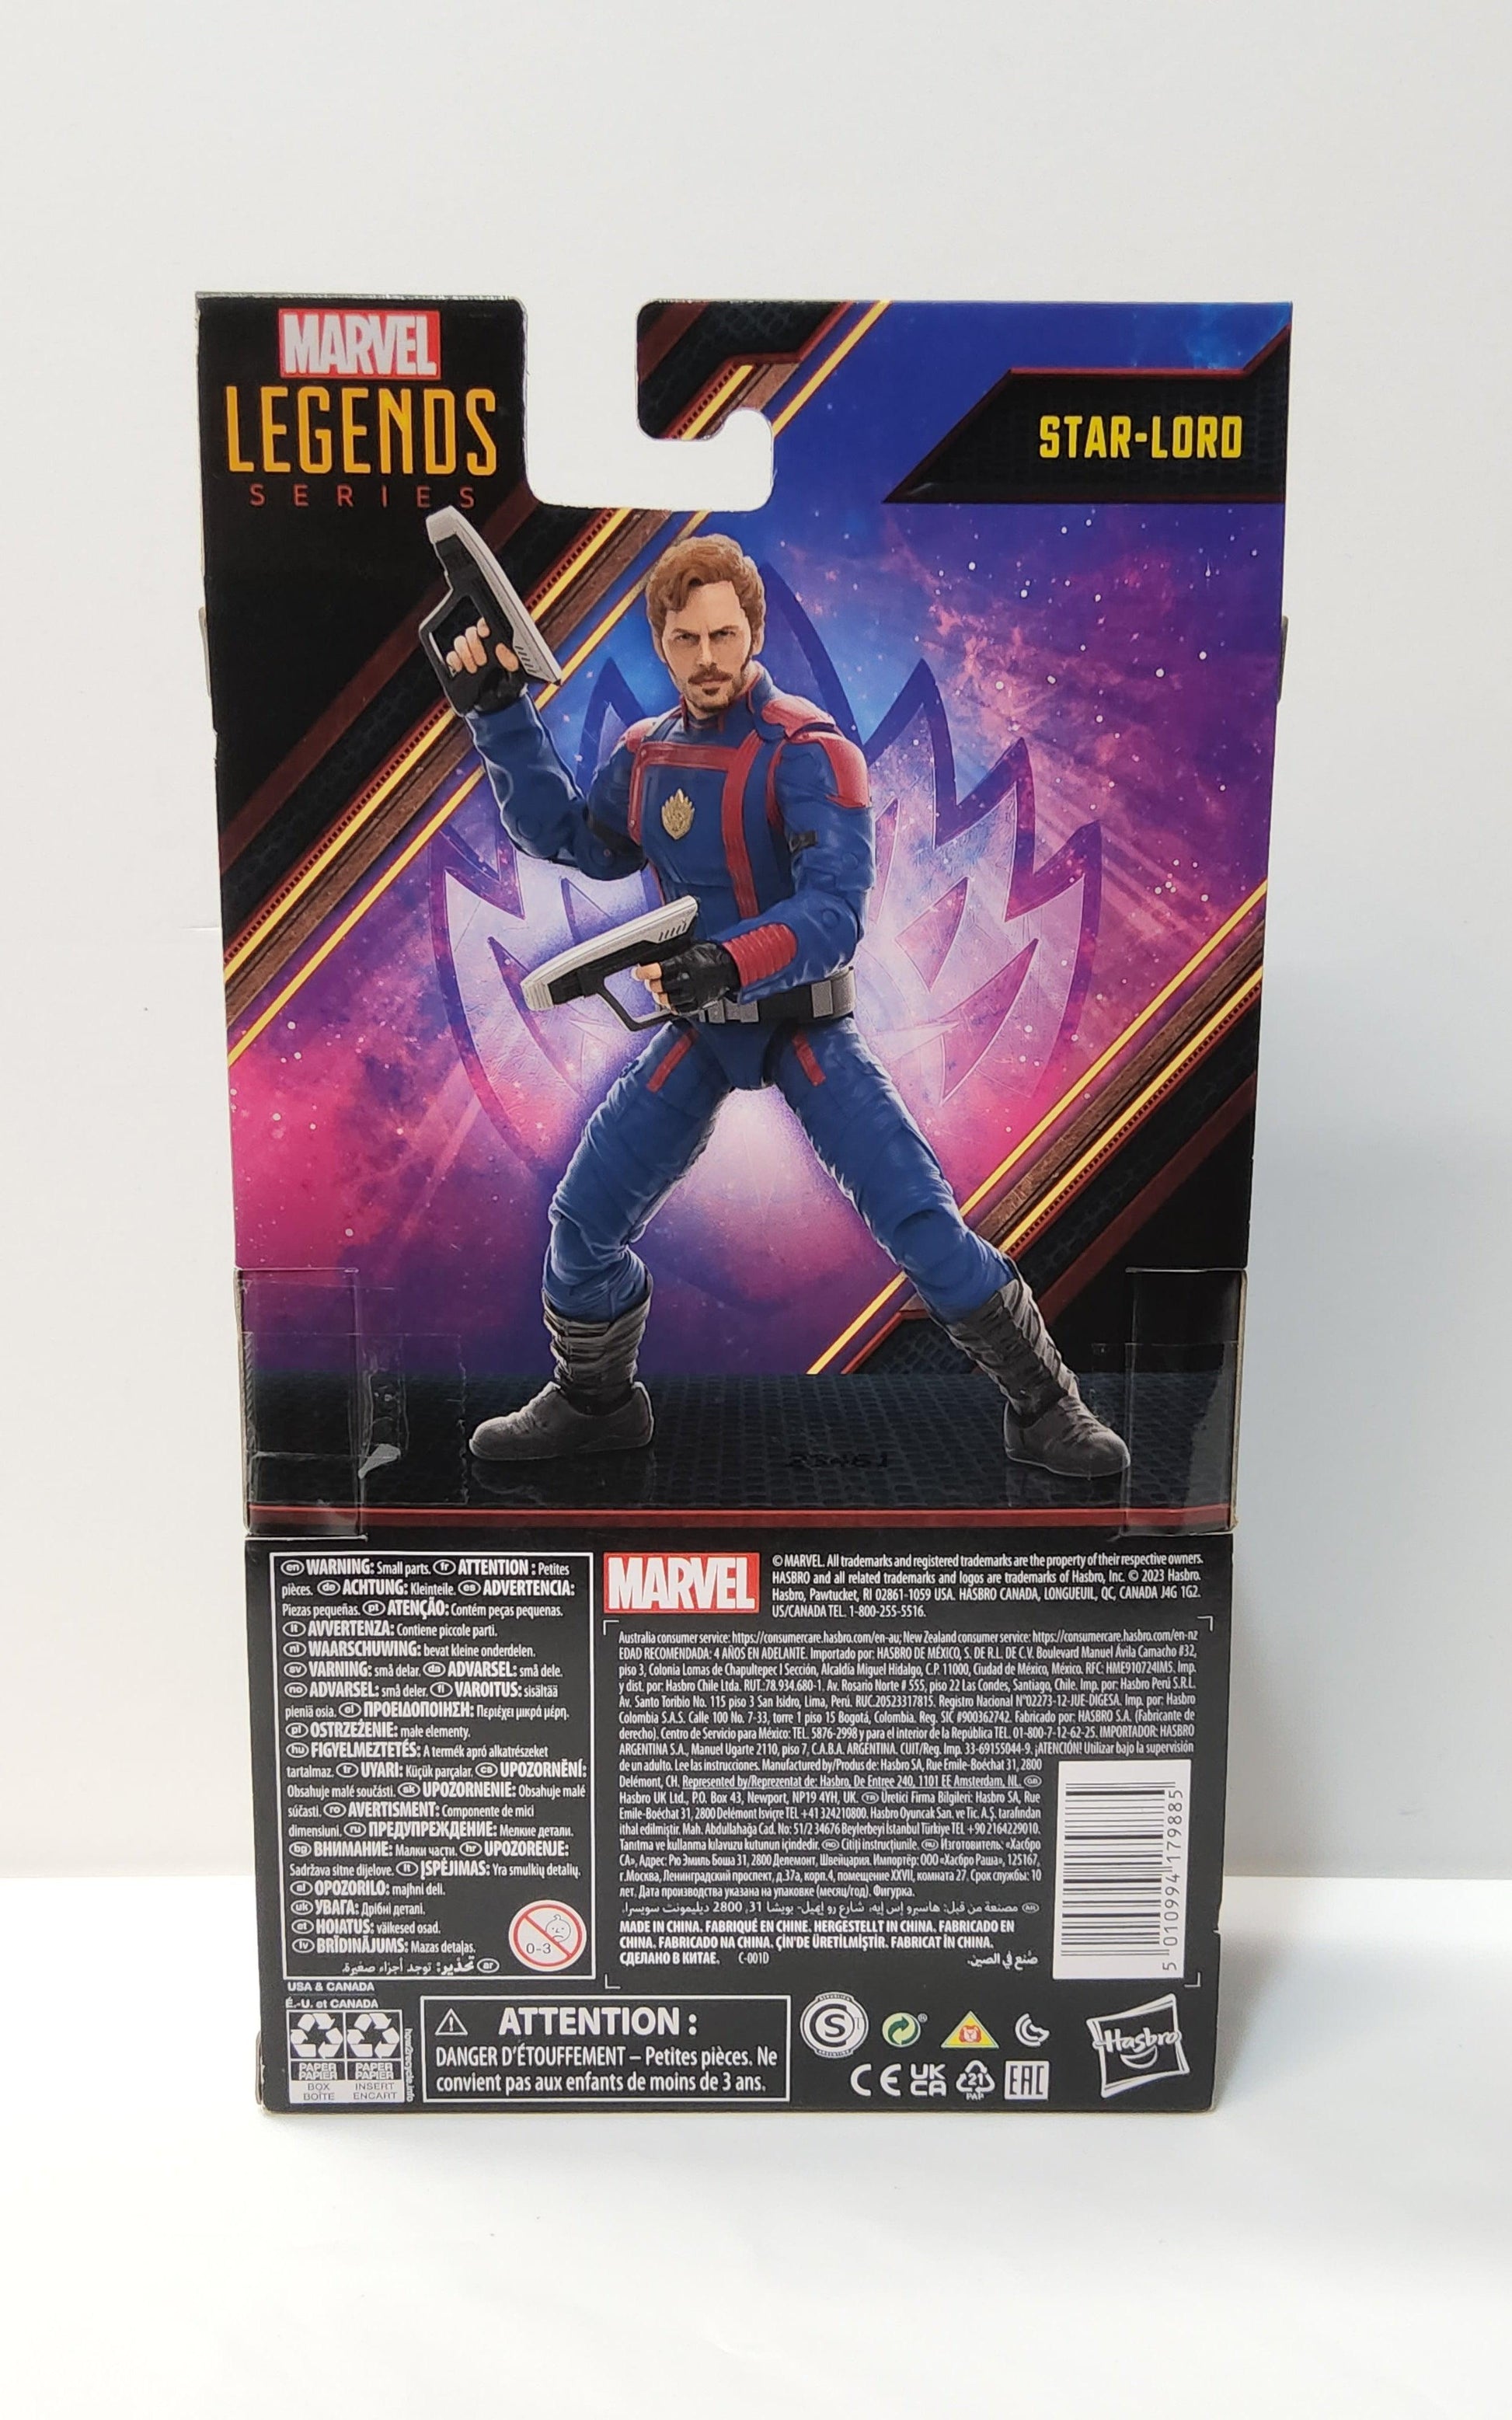 Hasbro Marvel Legends Star-Lord with Cosmo Build a Figure Guardians of the Galaxy 3 - Logan's Toy Chest